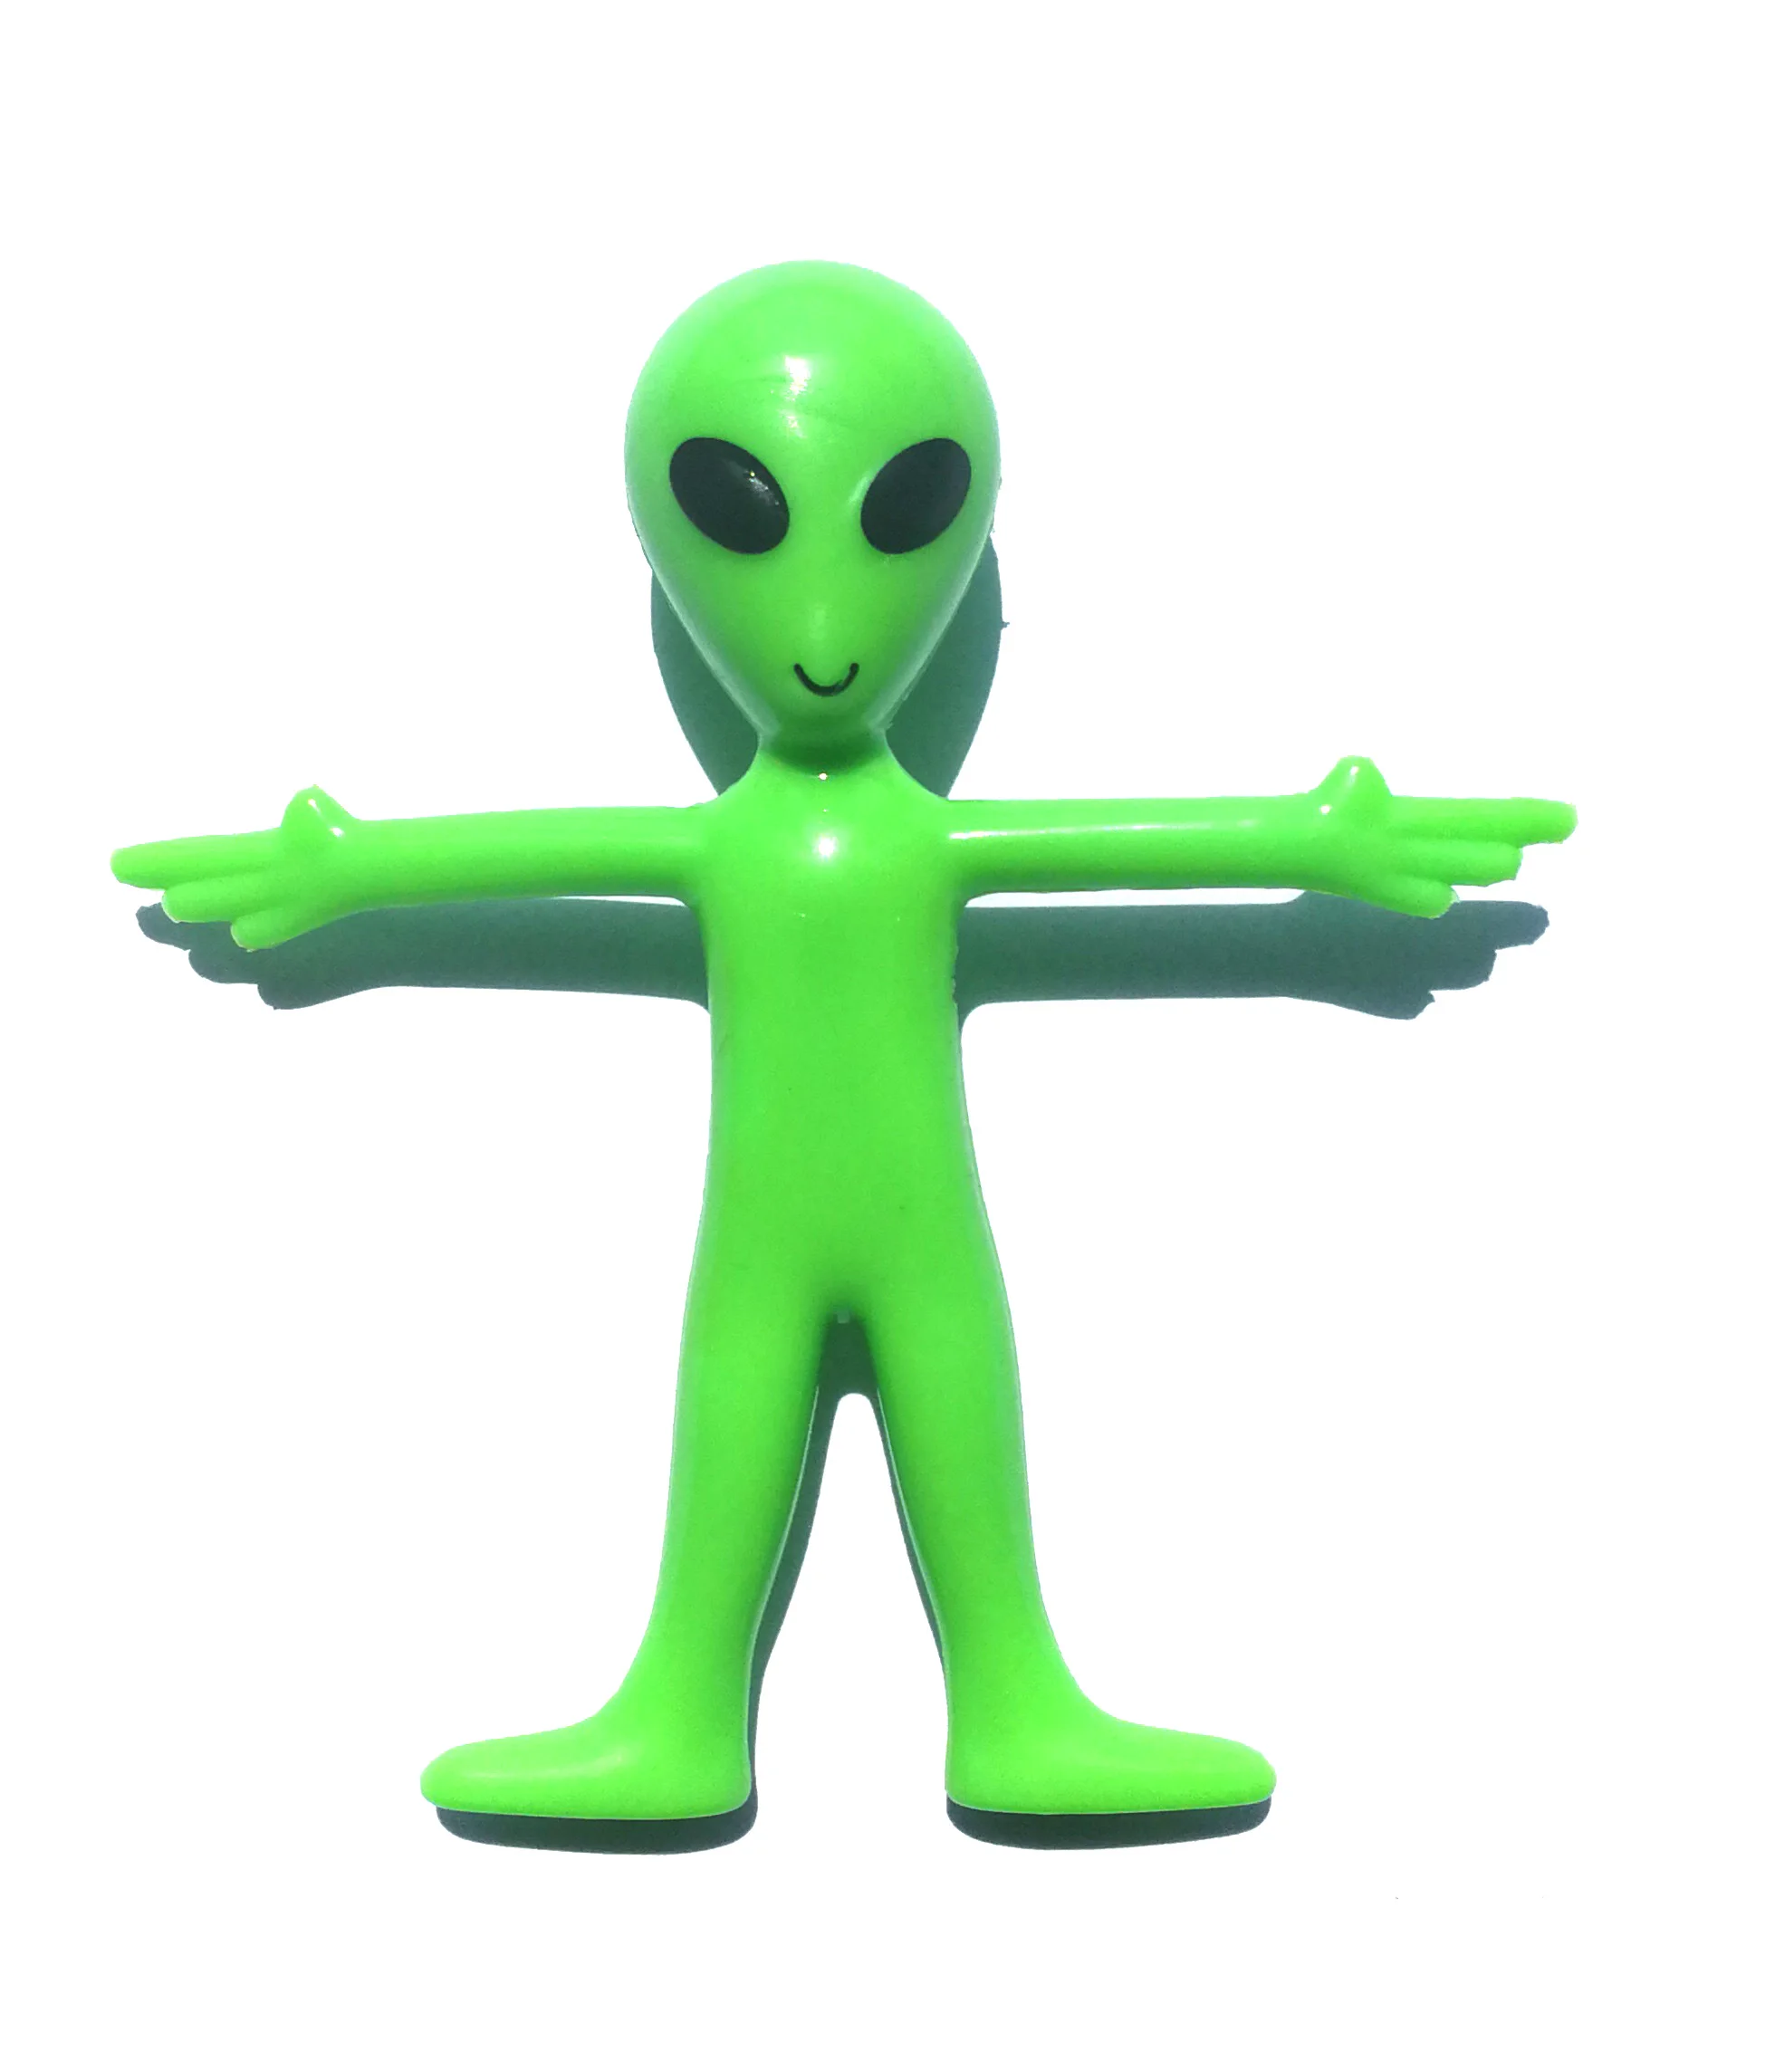 Small Size Cartoon Toy Eco-friendly Pvc Alien Figure Green Alien Doll Toy -  Buy Green Alien Doll Toy,Alien Toys,Toy Outdoor Play Product on 